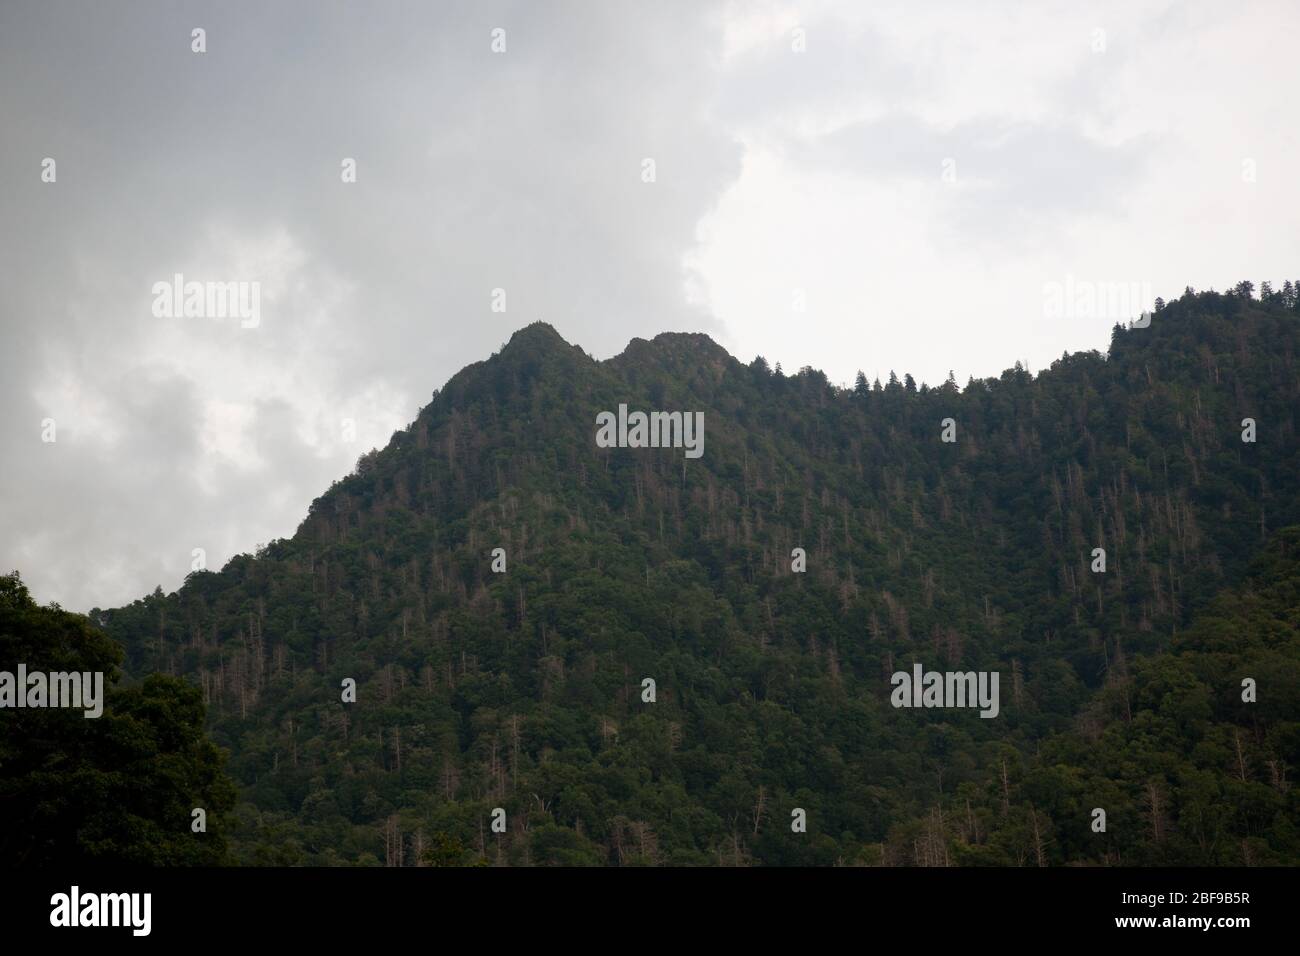 Distant Mountains with trees Stock Photo